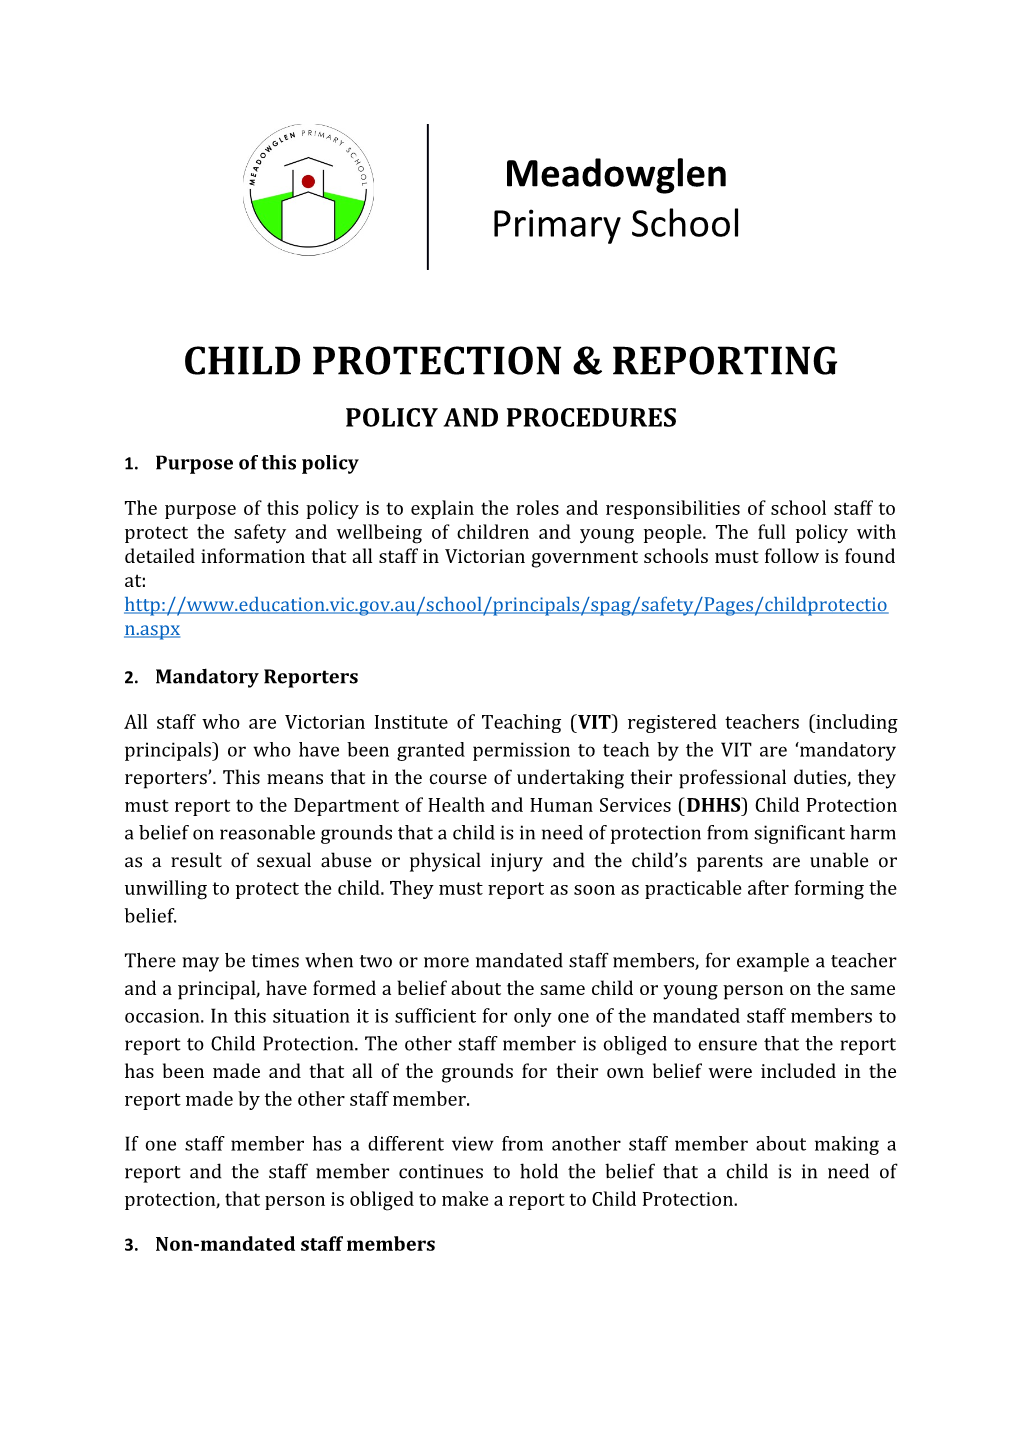 Child Protection & Reporting